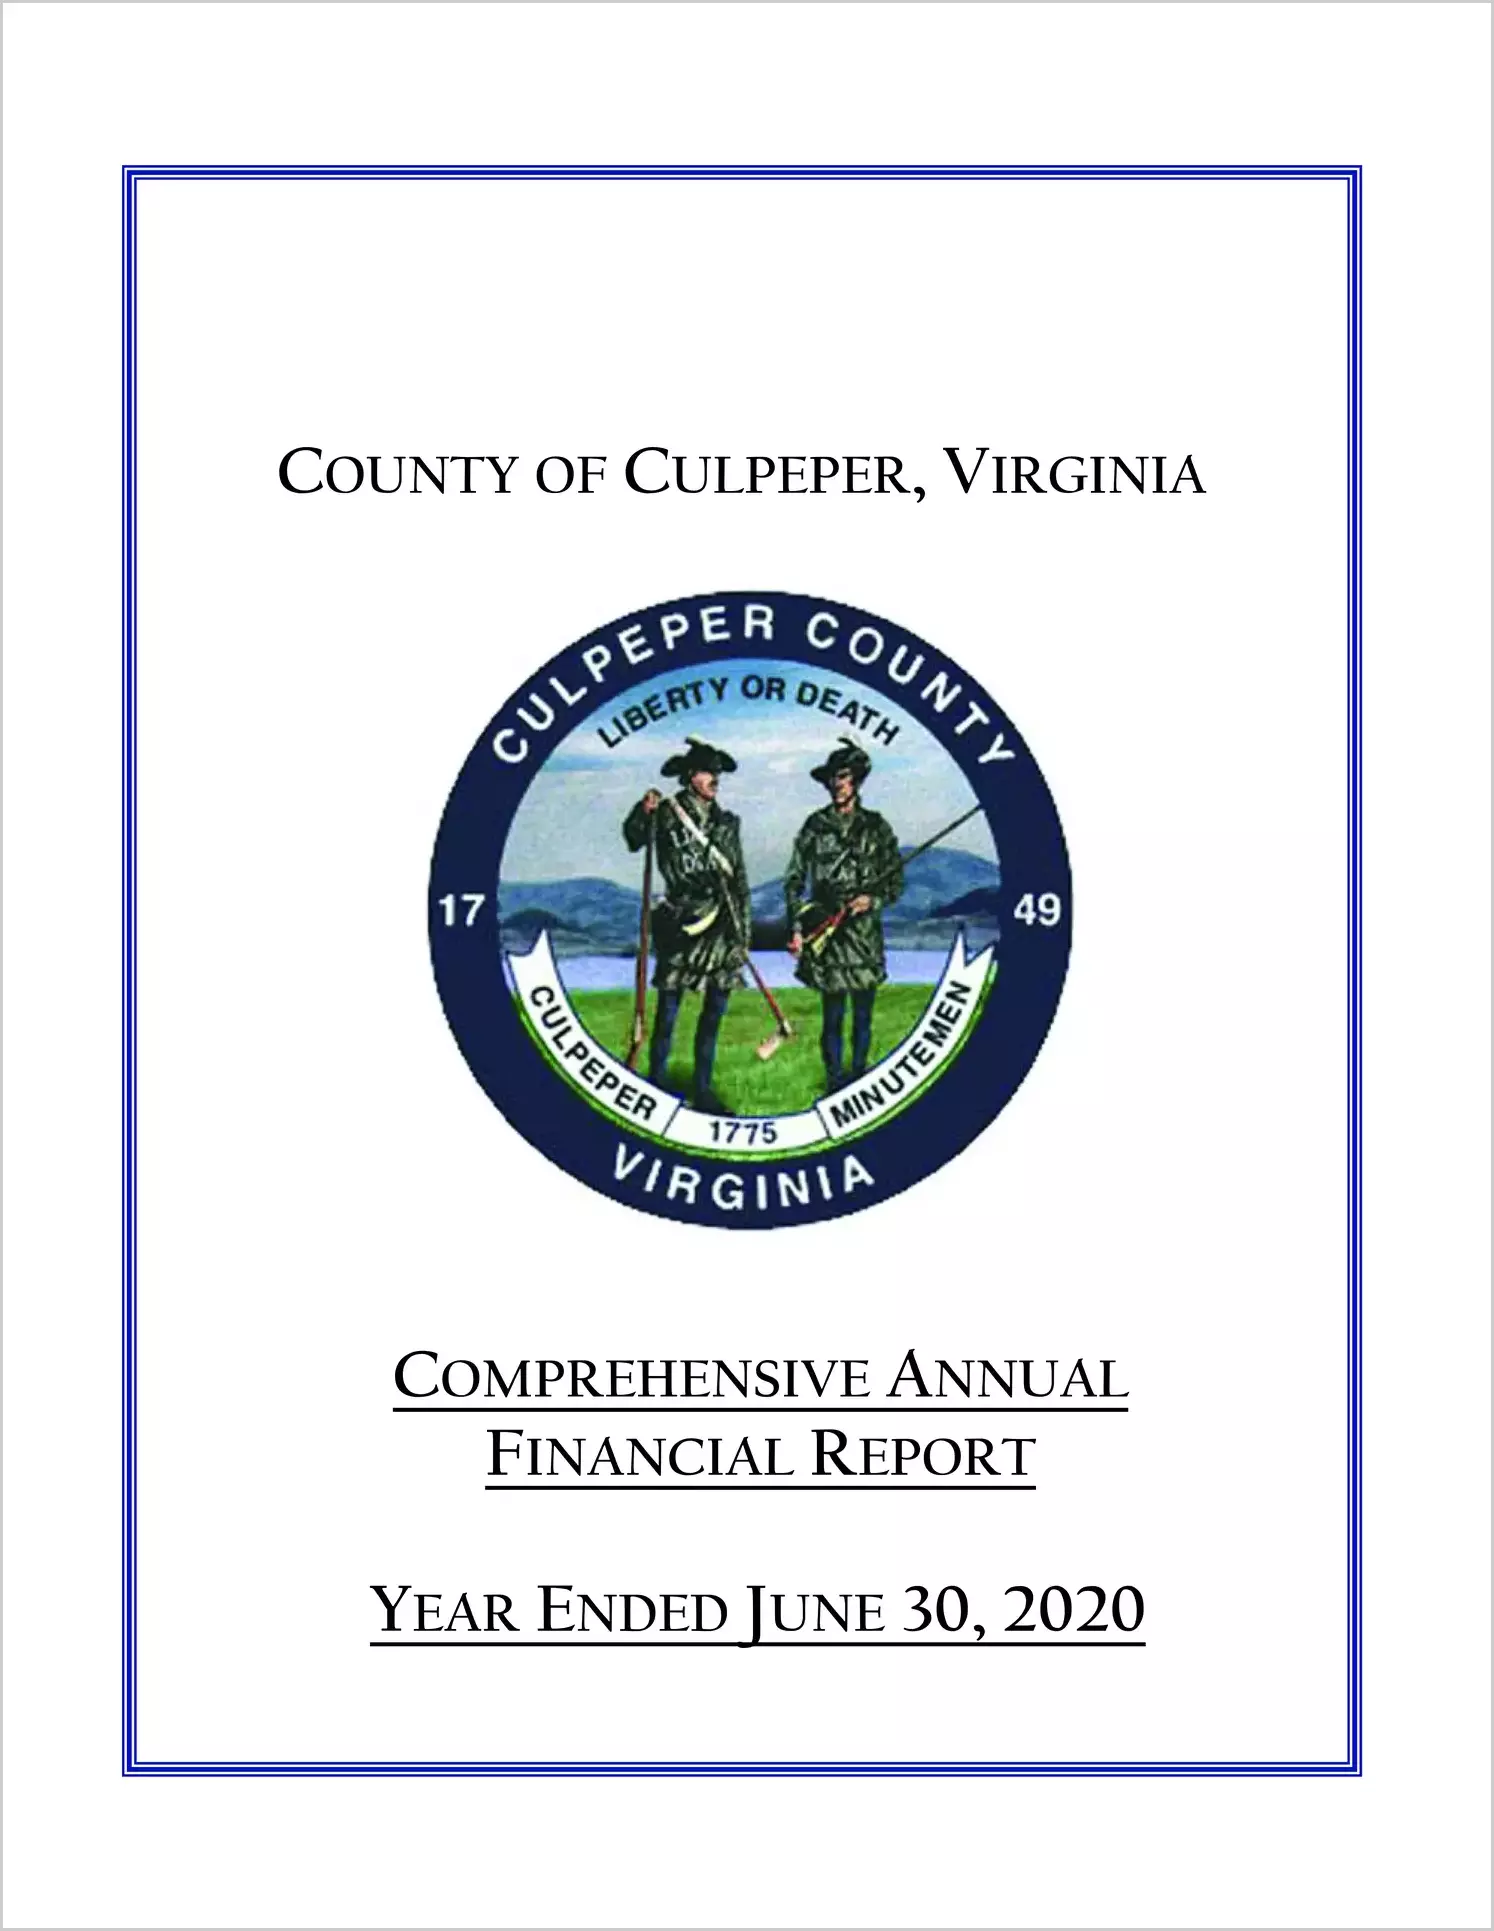 2020 Annual Financial Report for County of Culpeper